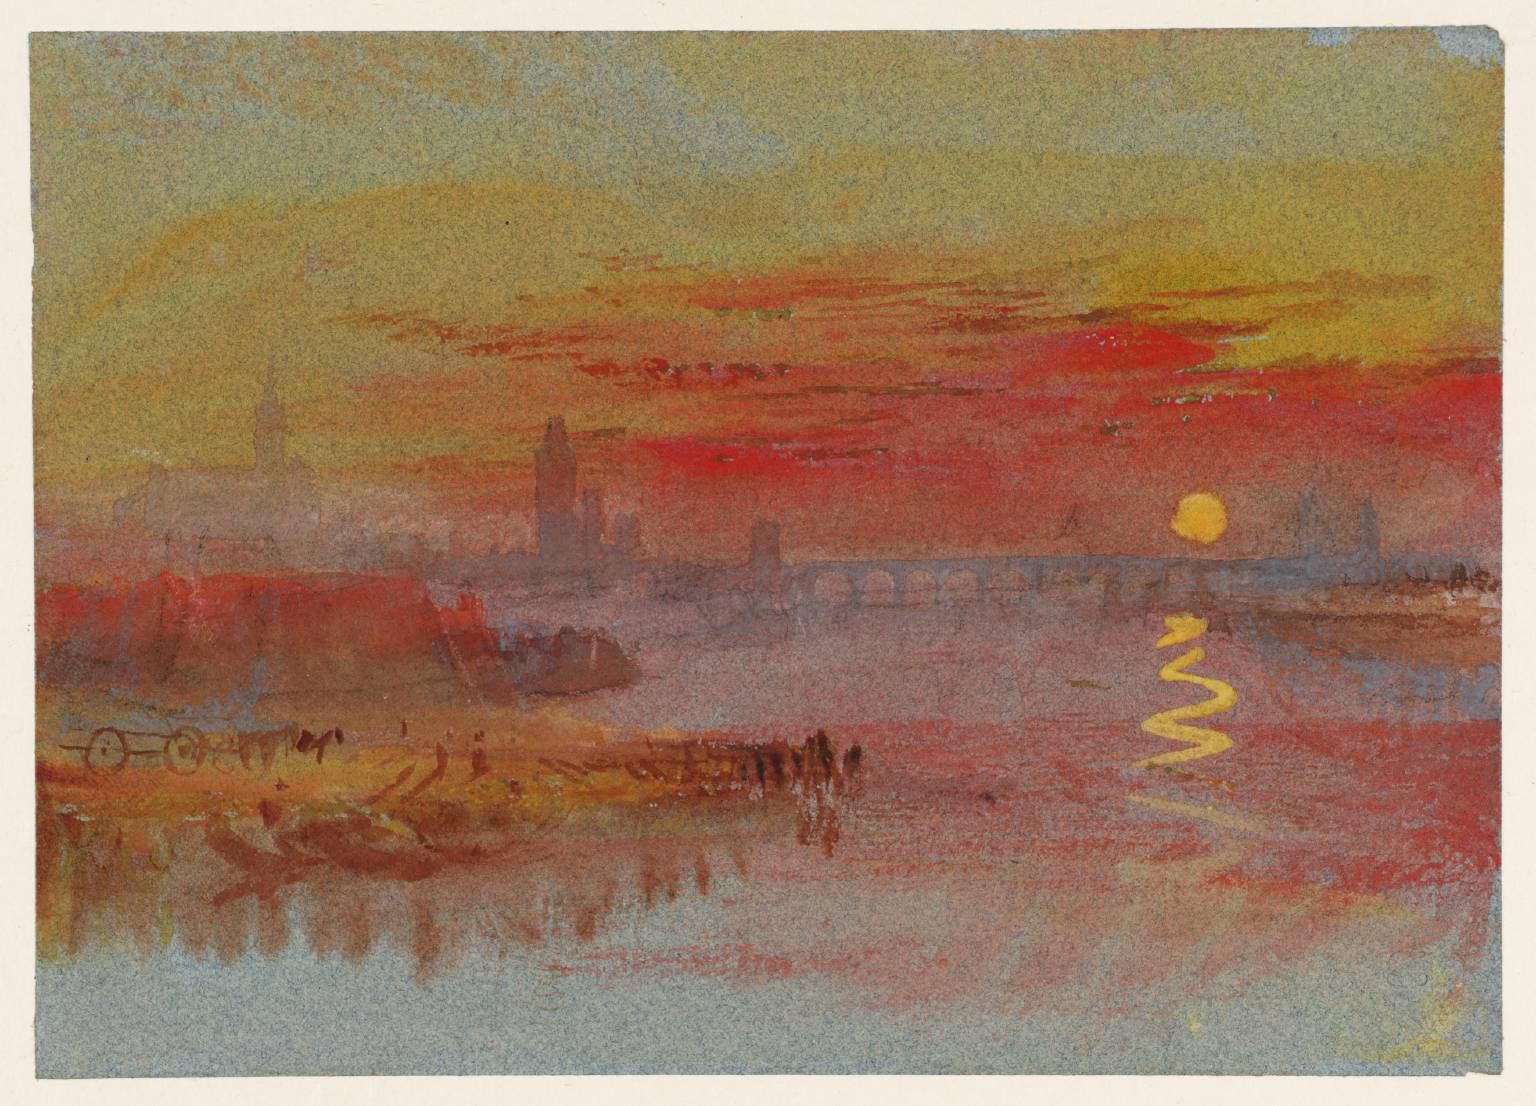 The Scarlet Sunset circa 1830-40 by Joseph Mallord William Turner 1775-1851